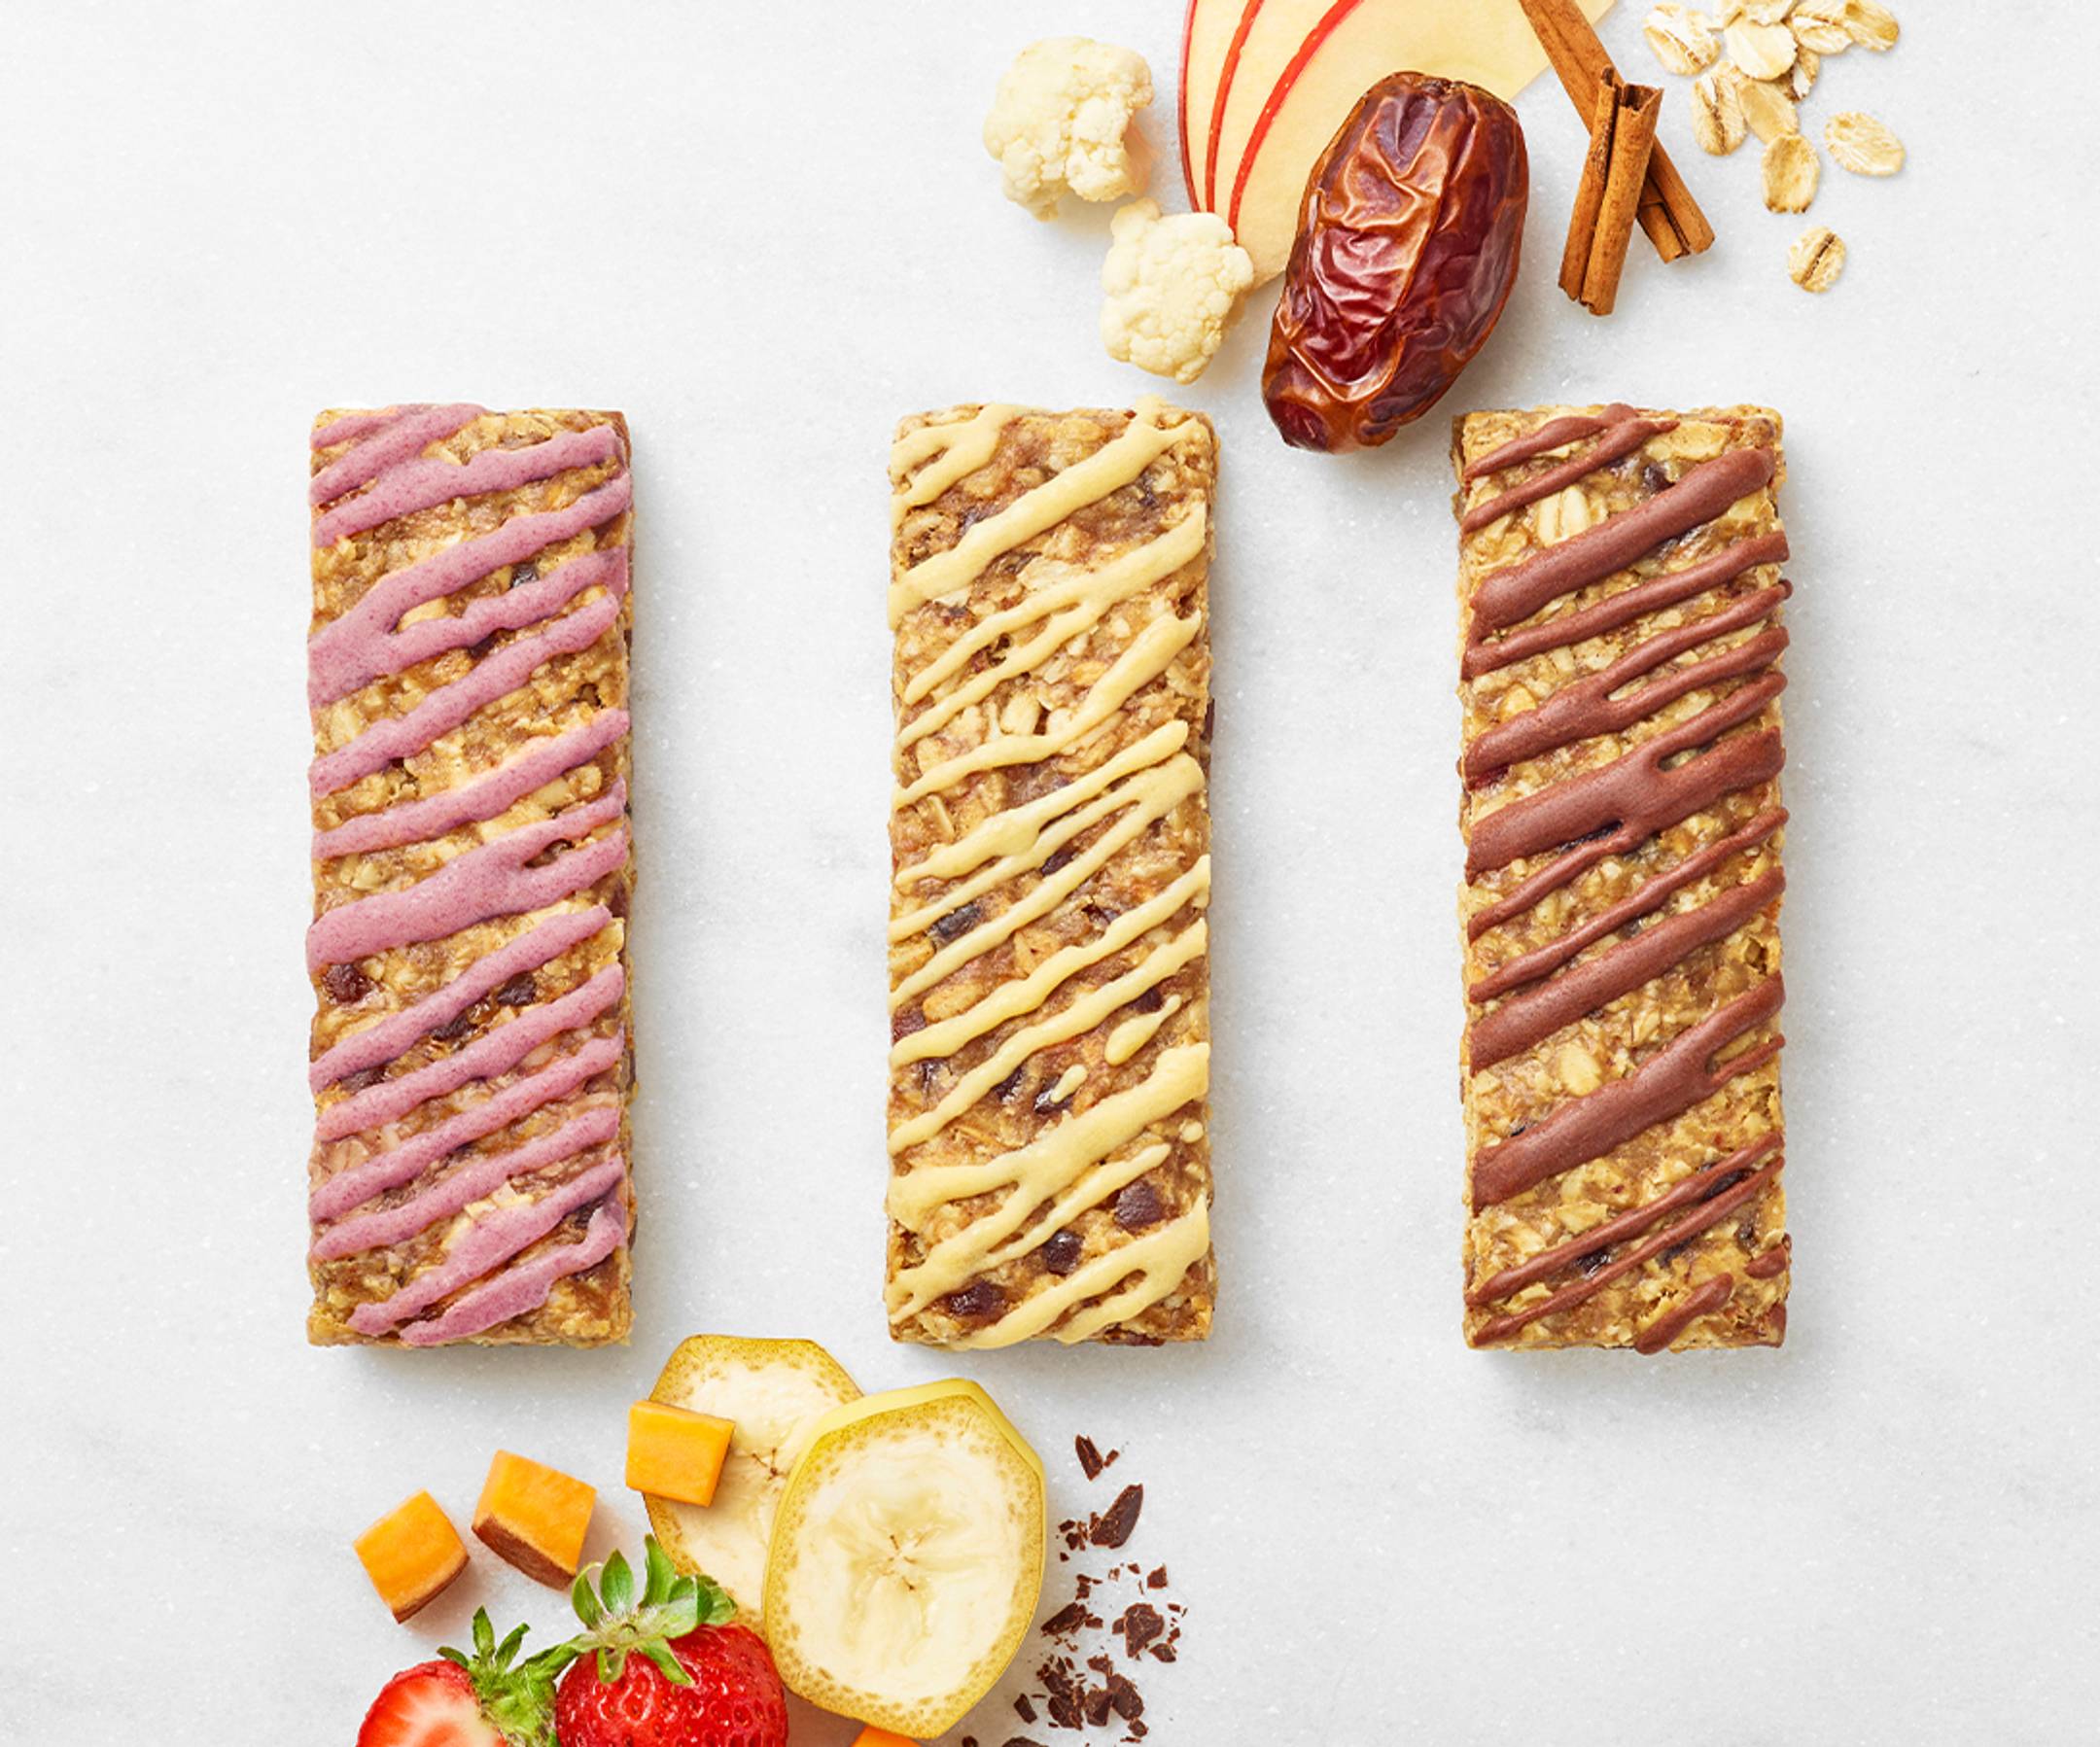 Image of the three Refrigerated Oat Bars out of package